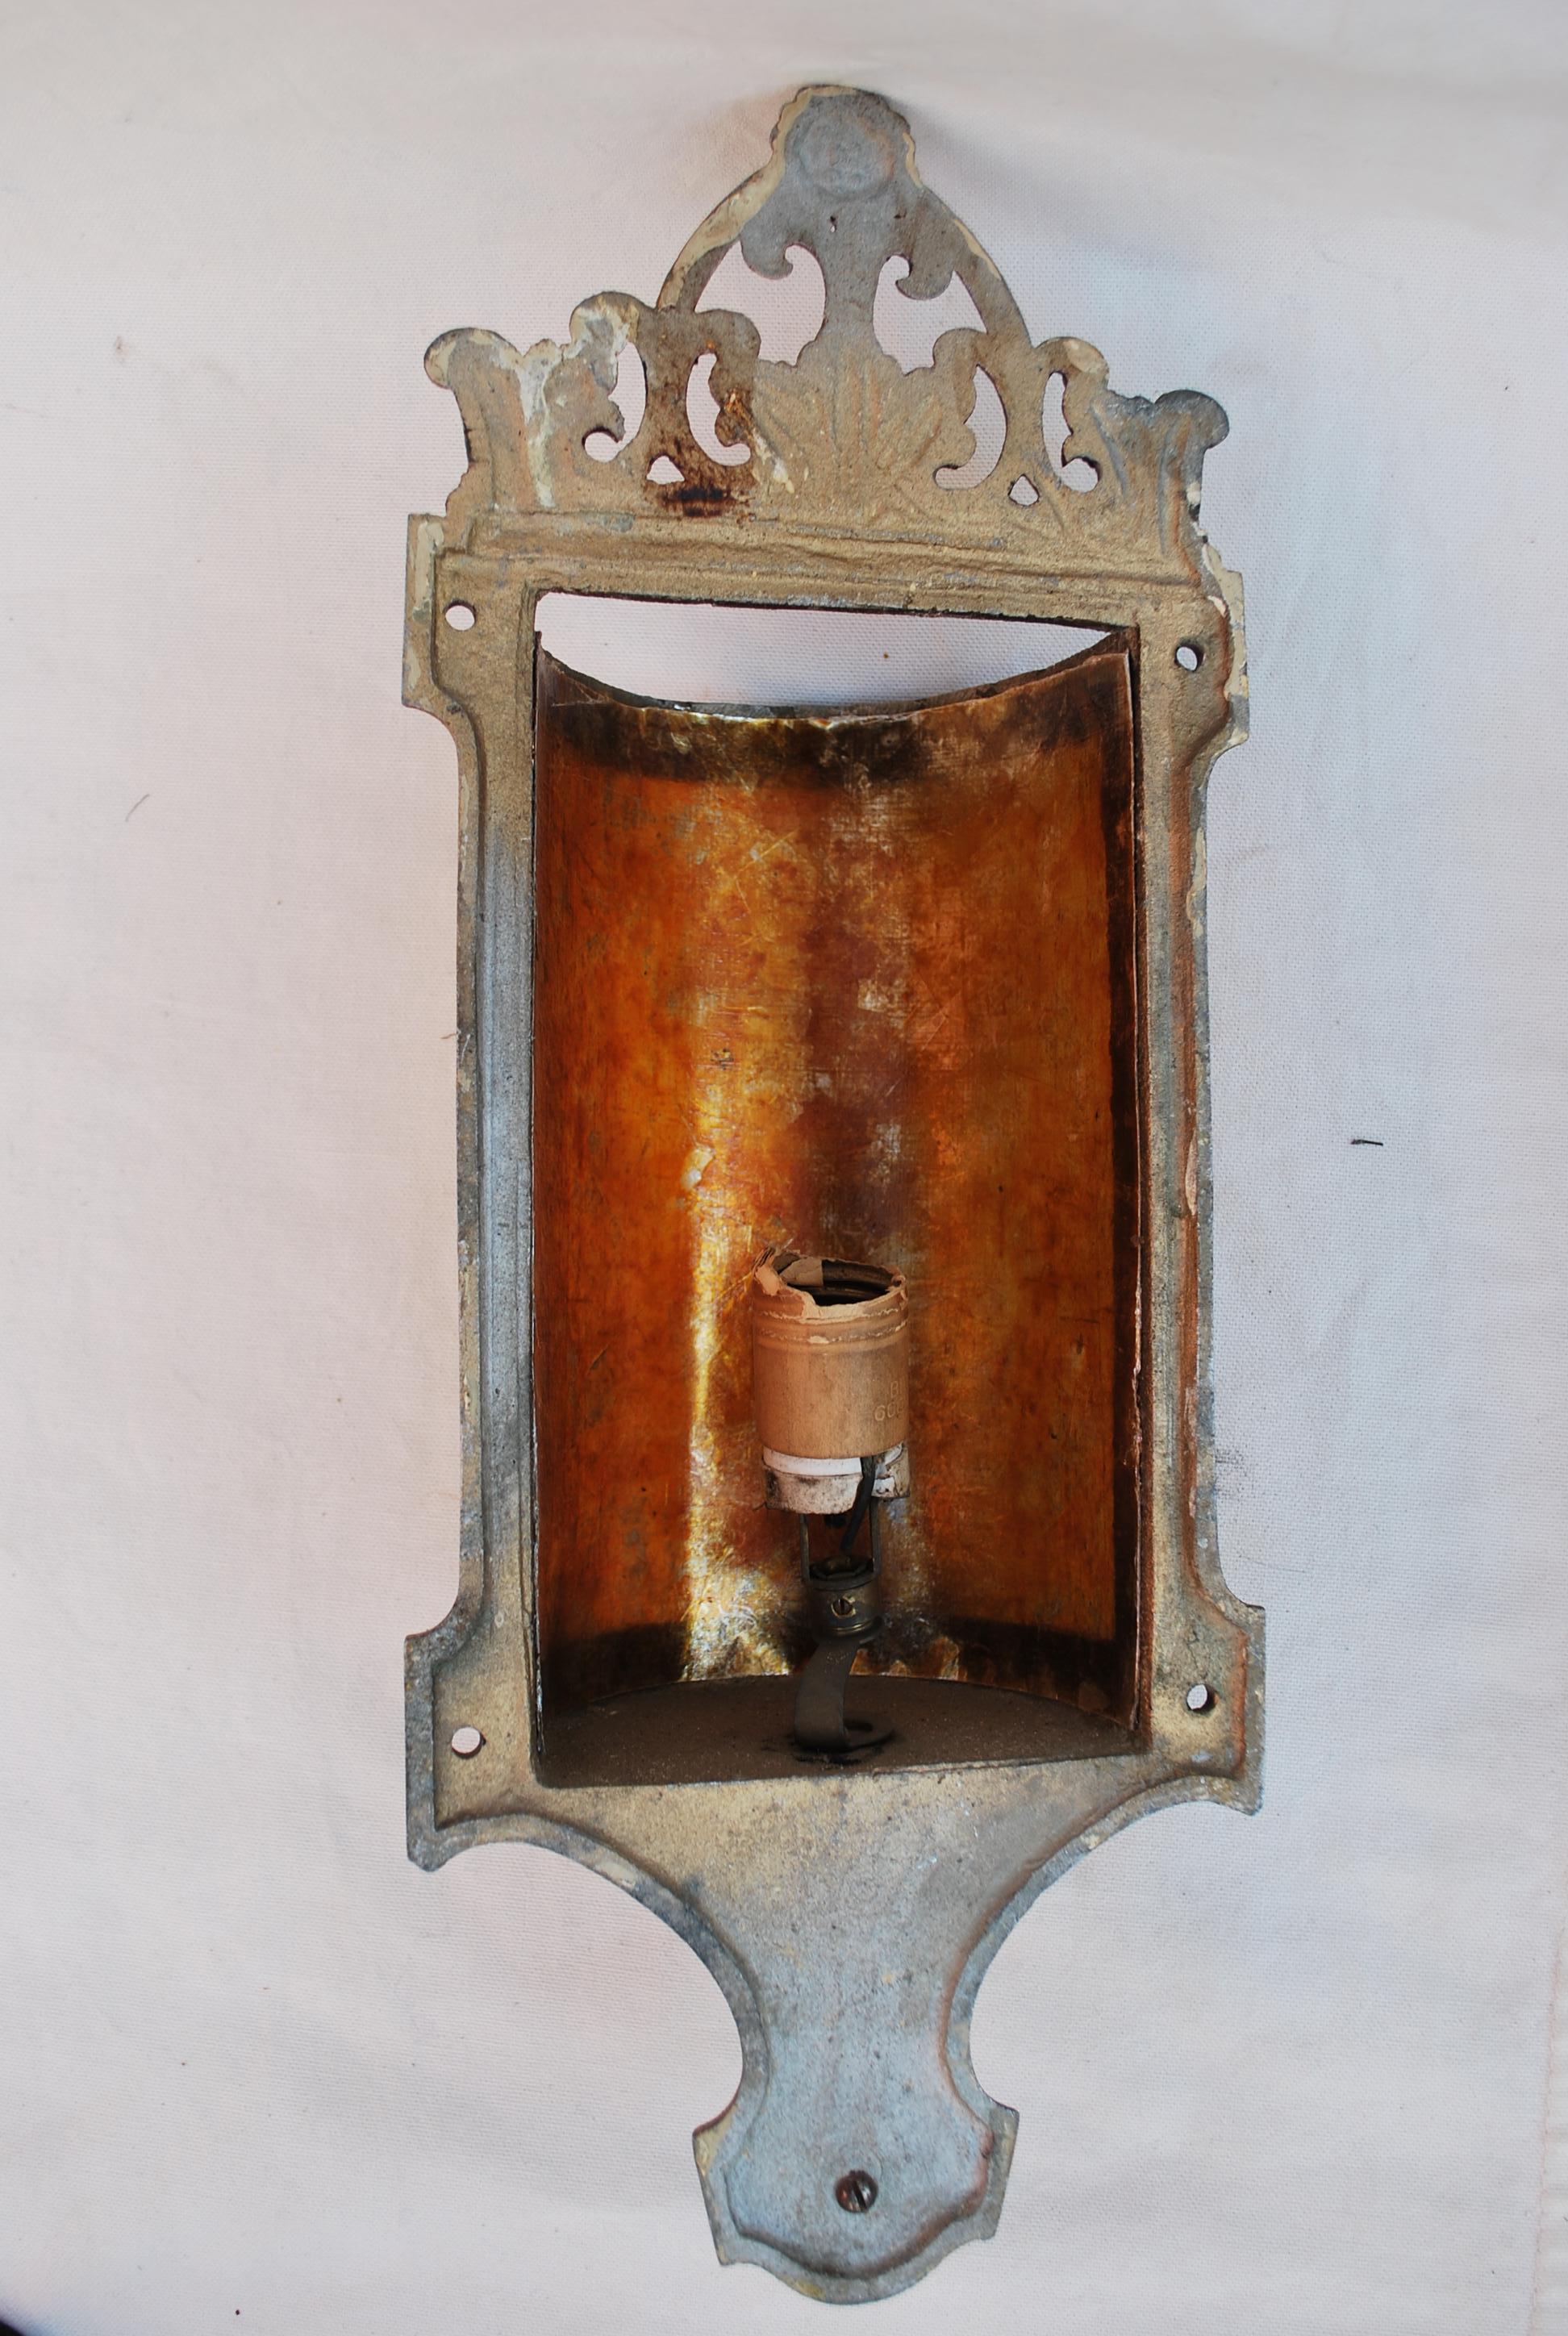 A very nice pair of 1920's wall sconces, the mica has been replaced, the old one was really in bad shape